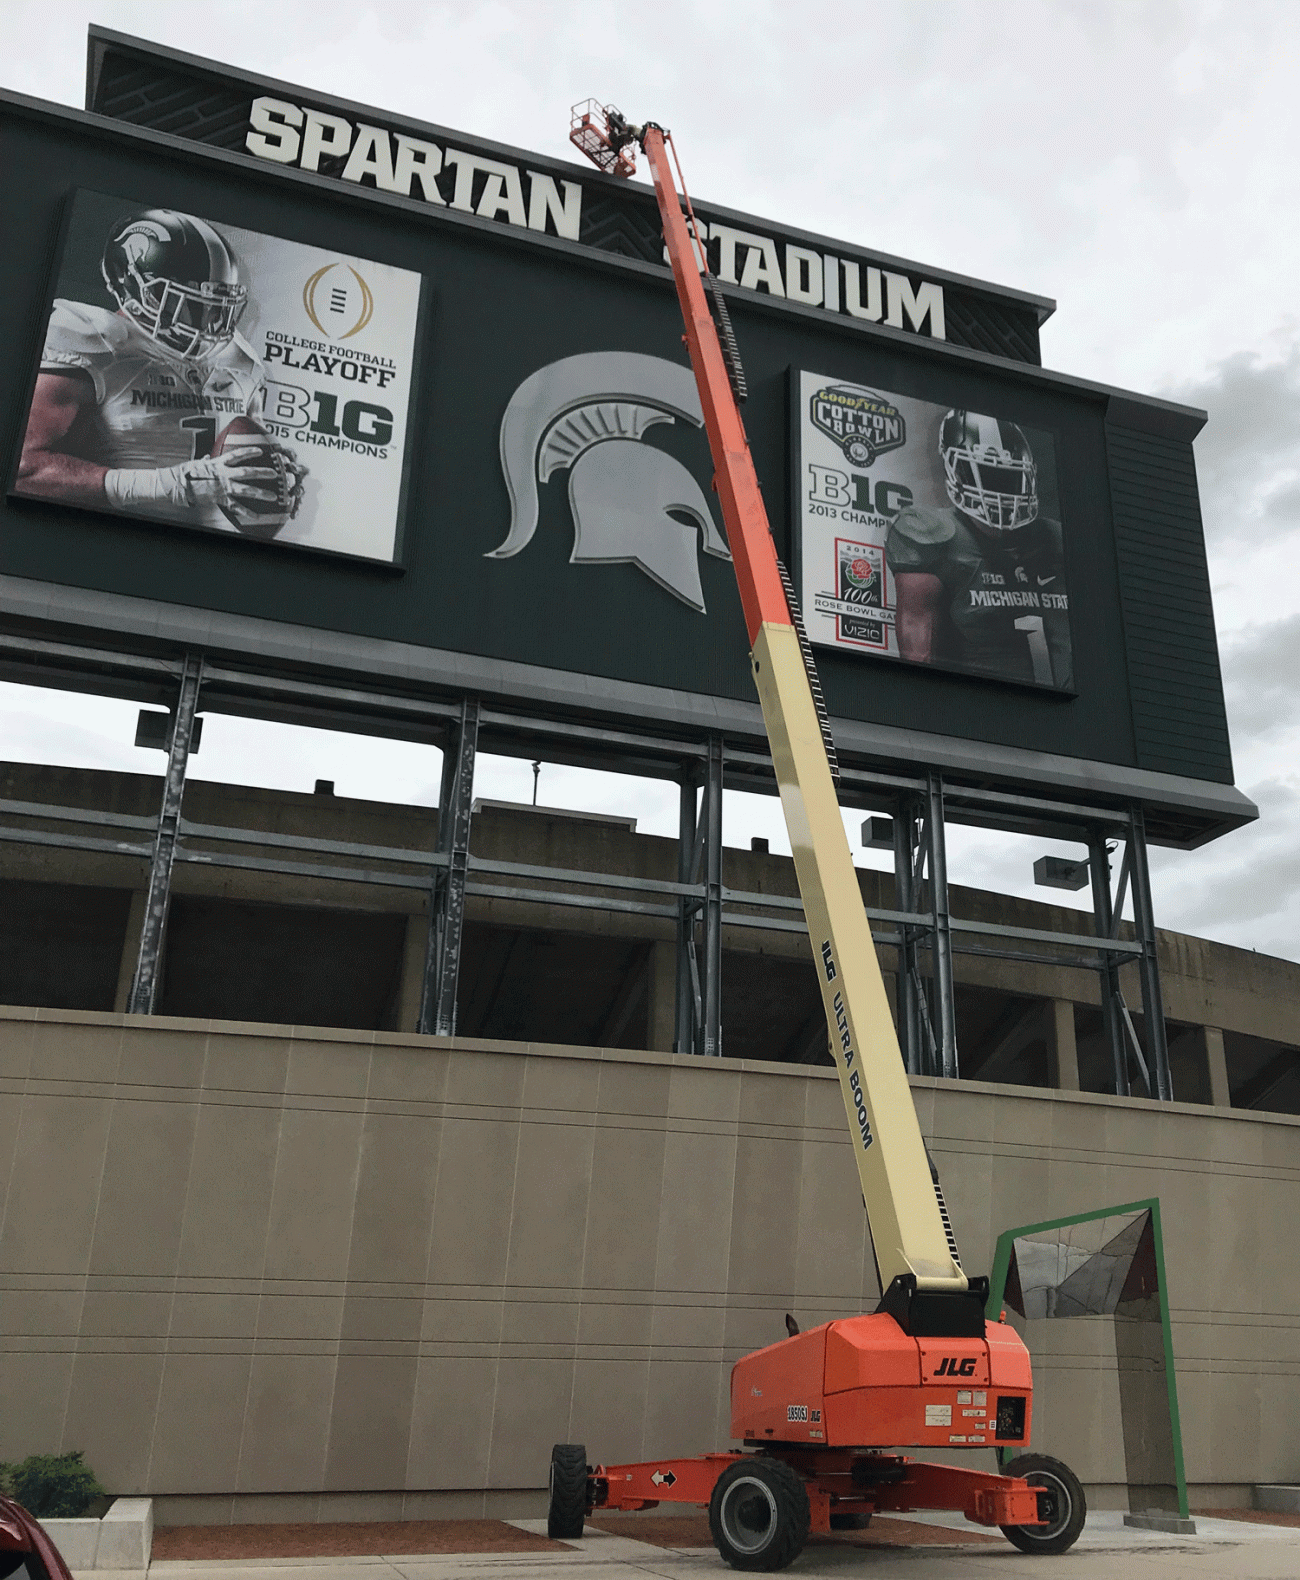 a large lift extends from the concrete ground to the top of the Spartan Stadium scoreboard